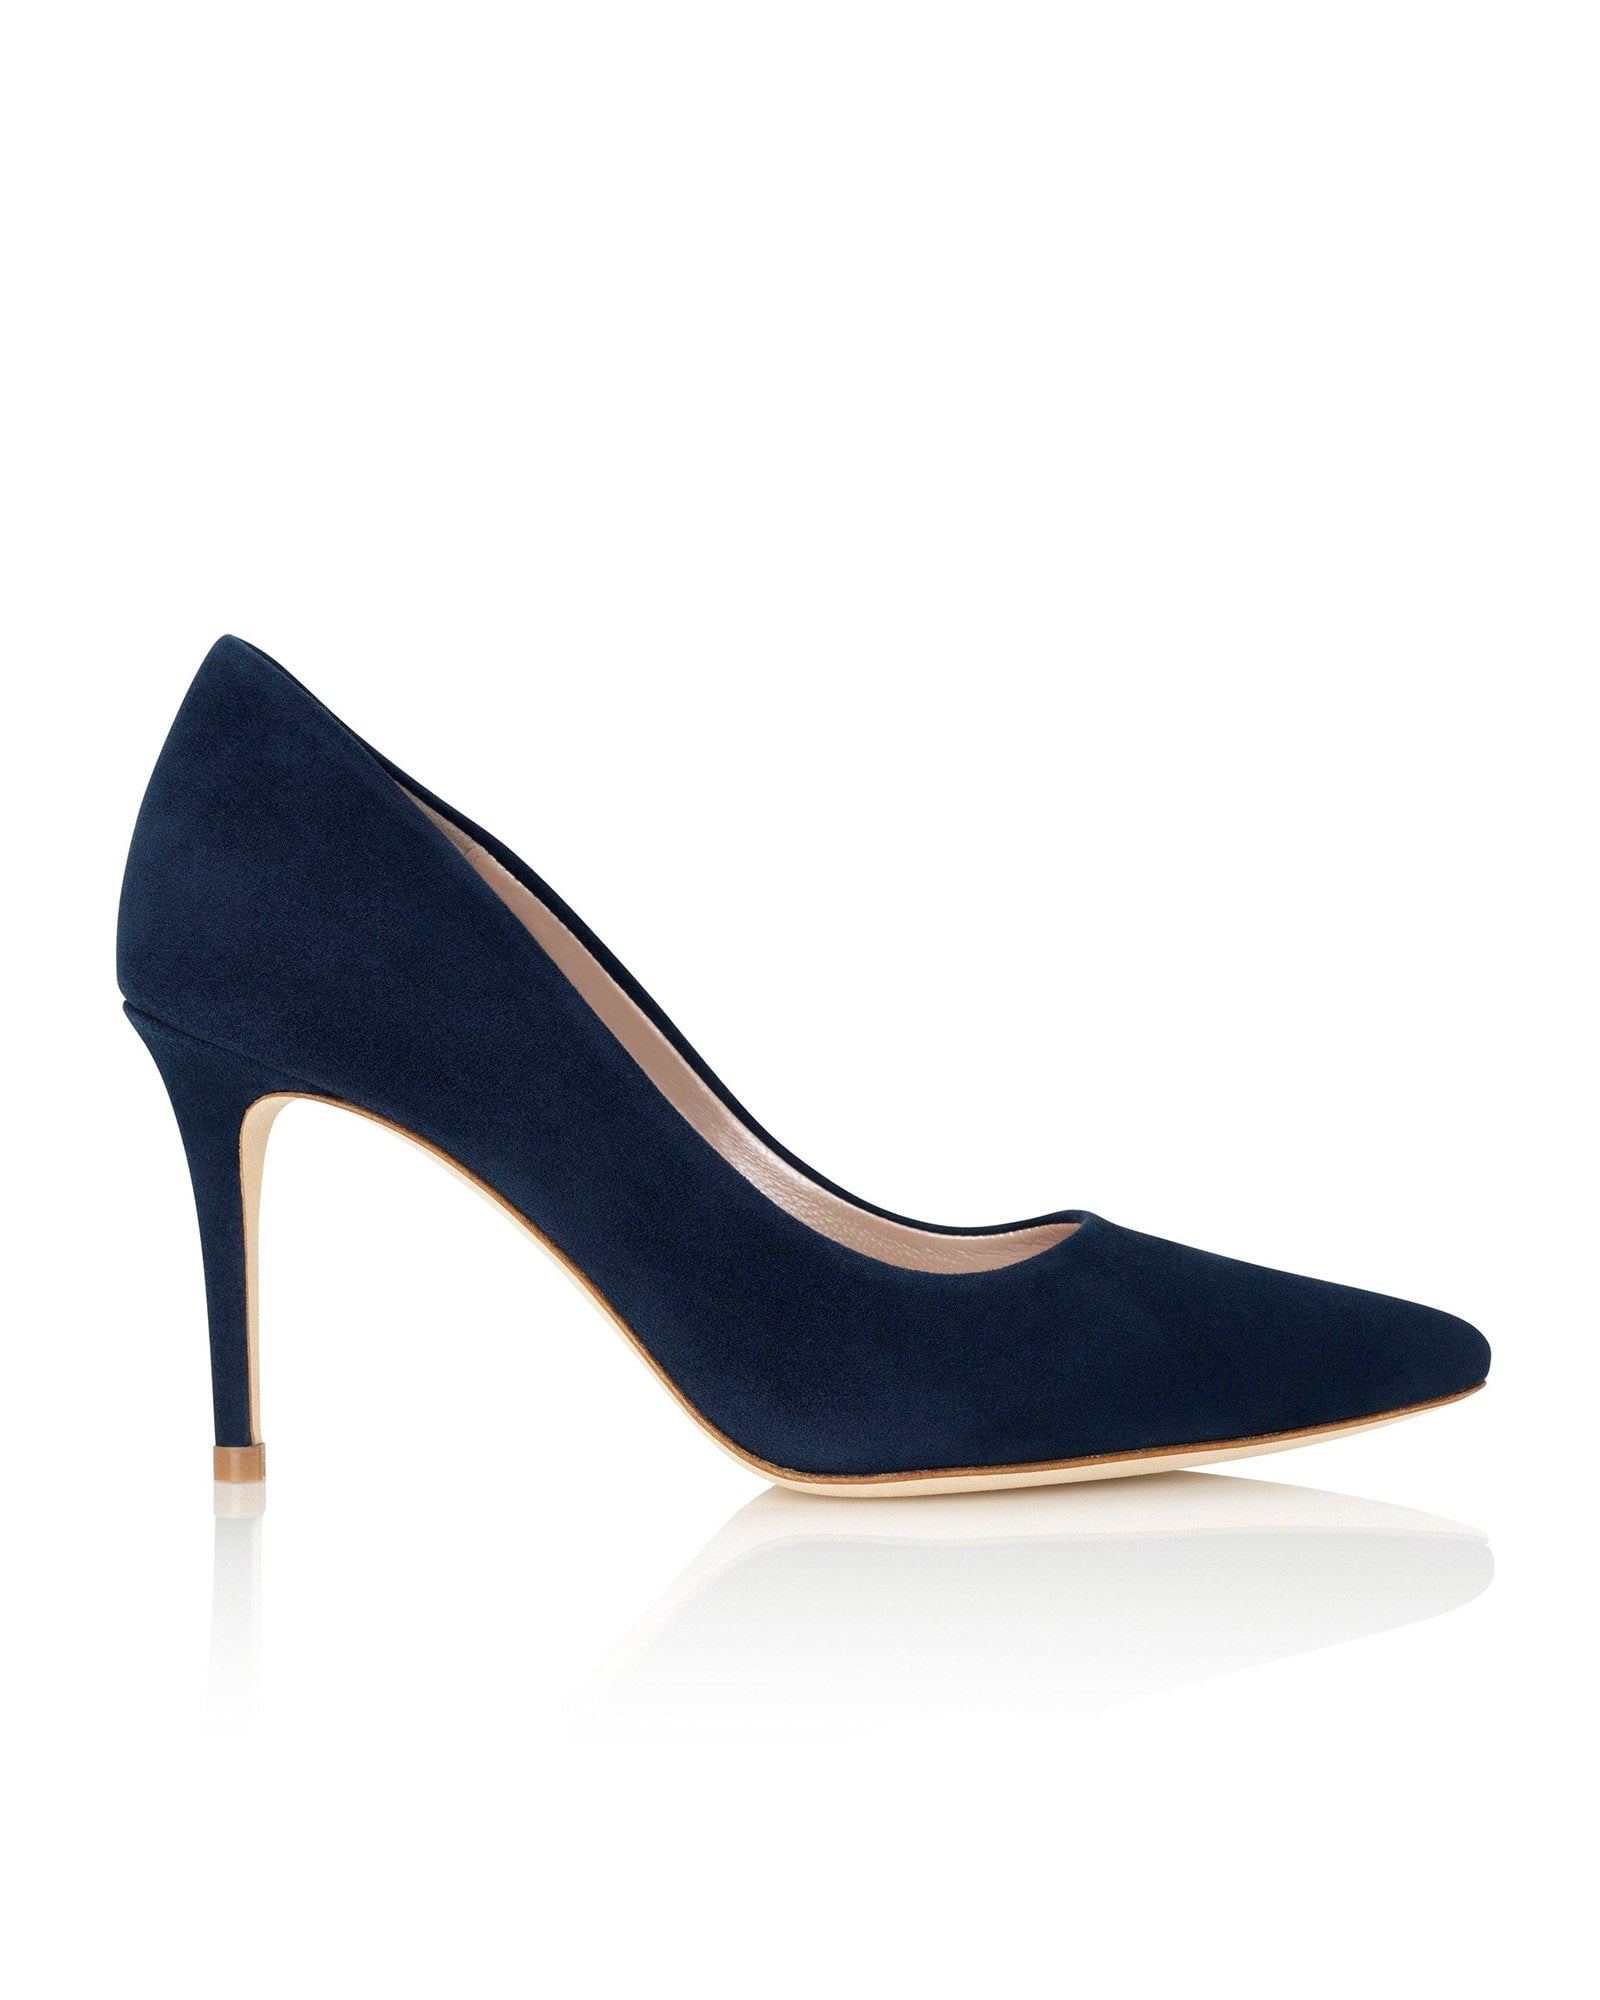 Claudia Midnight Navy Fashion Shoe Navy Blue Court Shoes  image